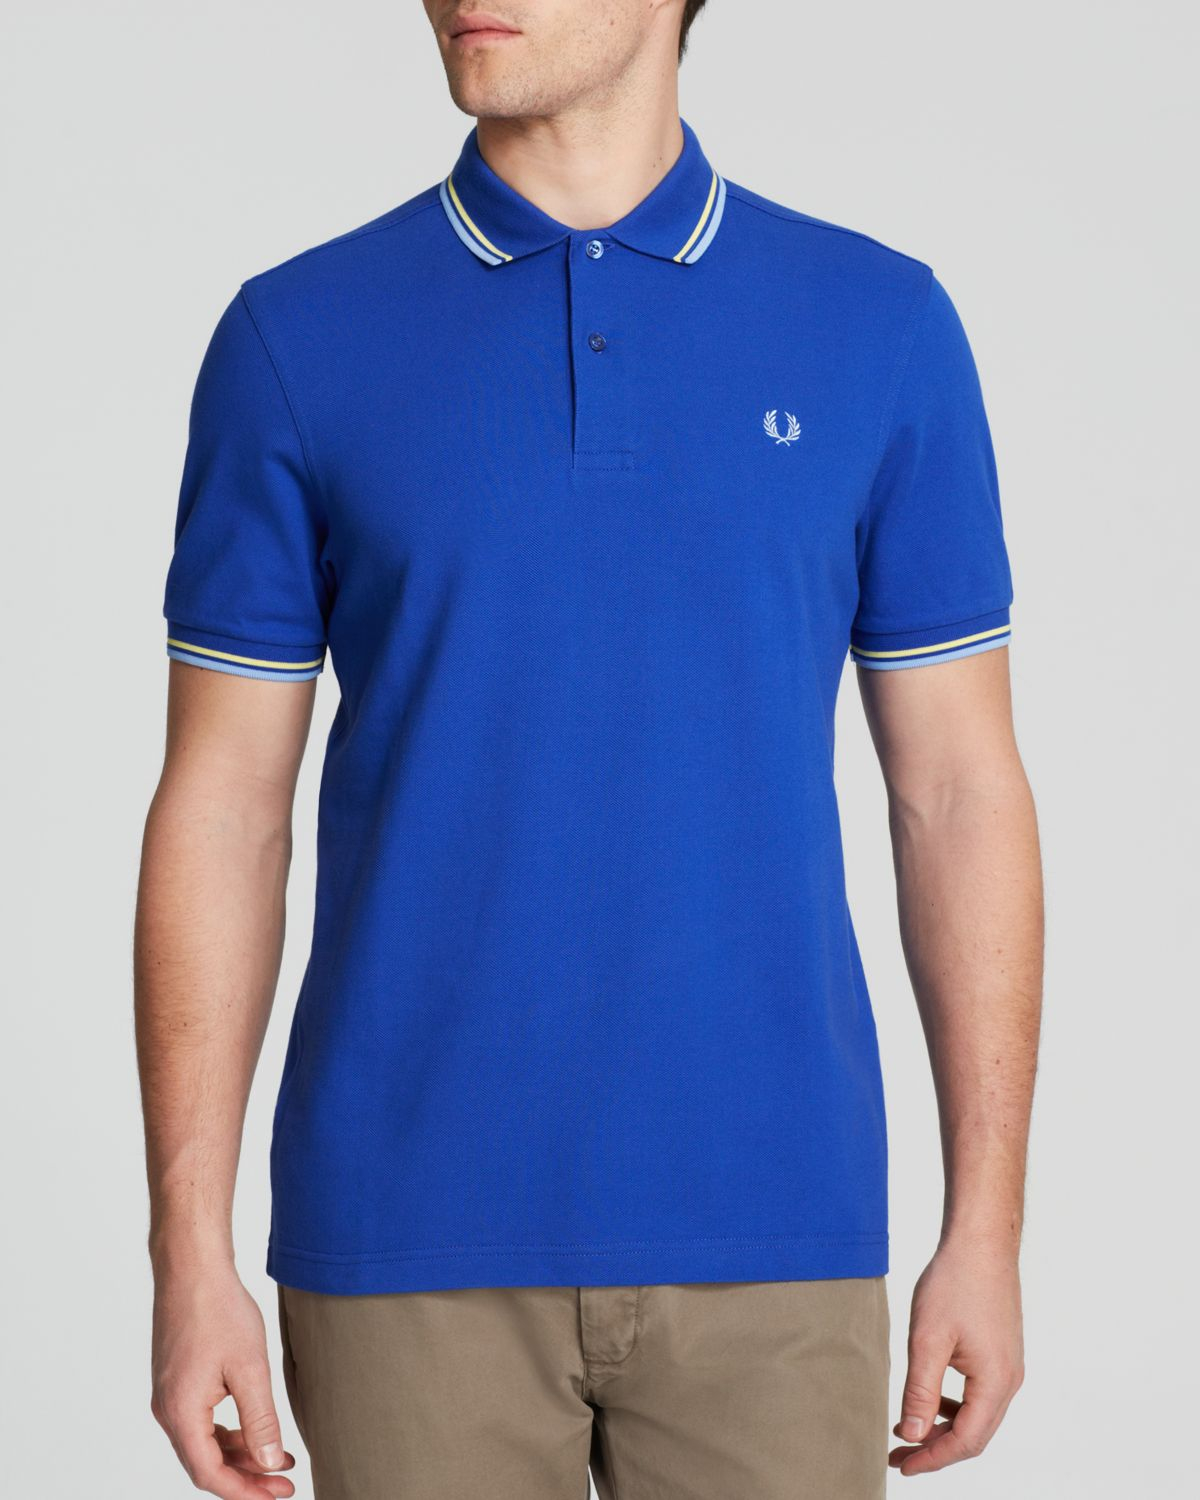 Fred perry Tipped Logo Polo - Regular Fit in Blue for Men (Regal/Soft ...